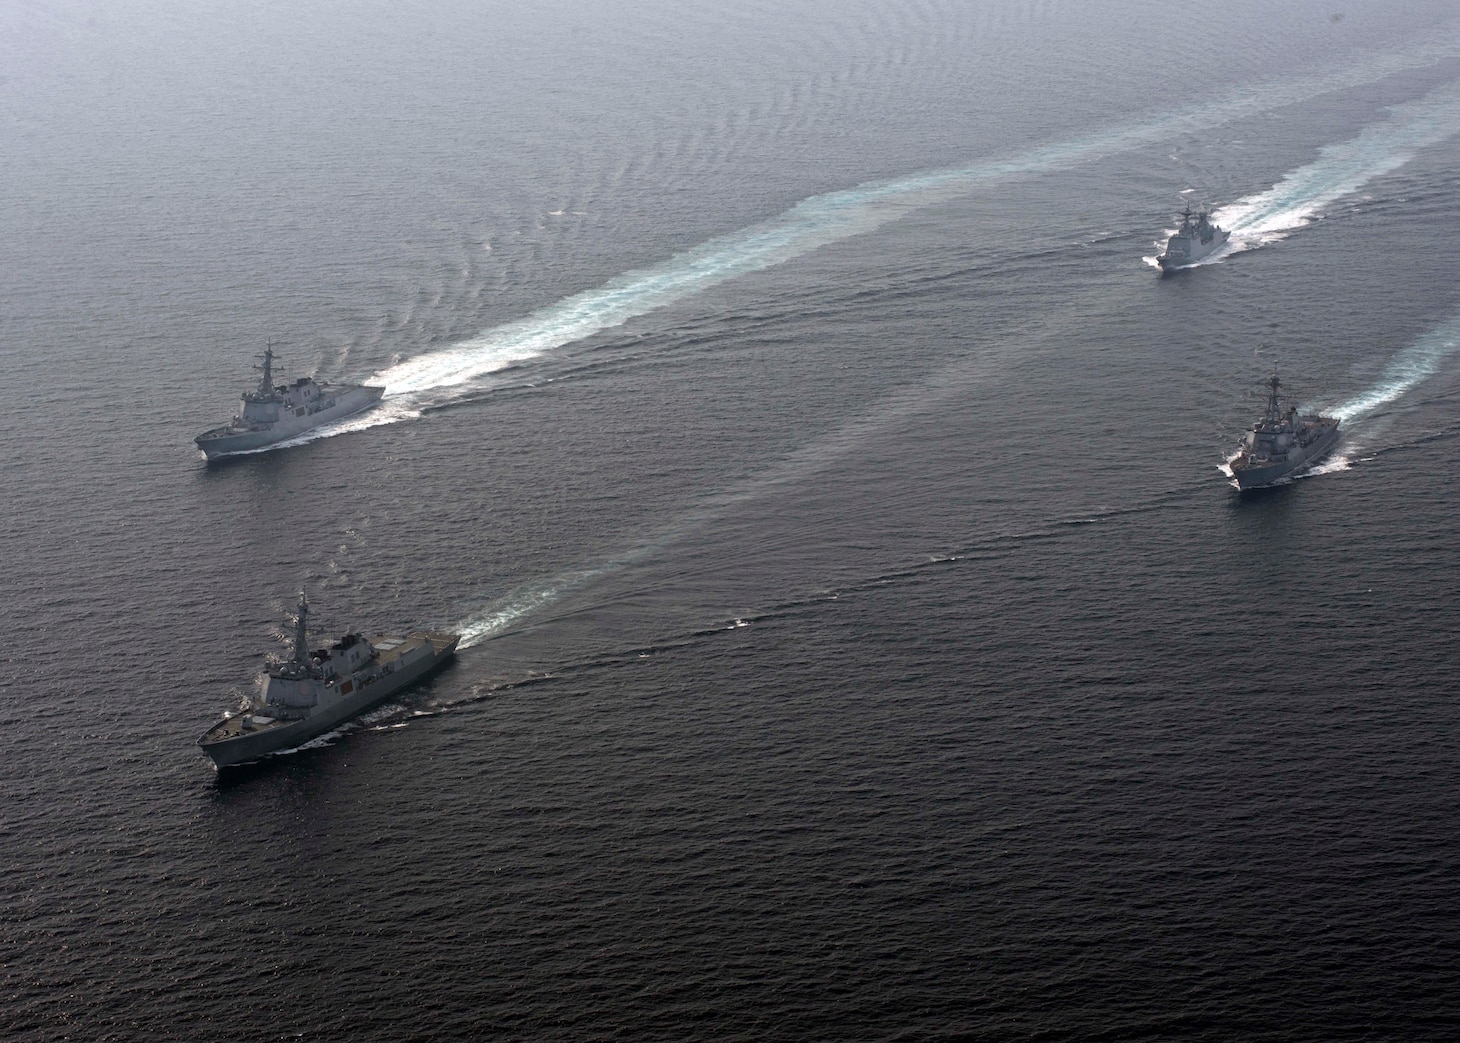 WATERS EAST OF THE KOREAN PENINSULA (Sept. 26, 2016) U.S. Navy and Republic of Korea Navy (ROKN) ships maneuver together during a combined maritime operation. ROKS Seoae Ryusungryong (DDG 993) (lead ship) ROKS Yul Gok Yii (DDG 992), (Clockwise) ROKS Kang Gam Chan (DDH 979) and U.S. Arleigh Burke-class guided-missile destroyer USS Spruance (DDG 111). 